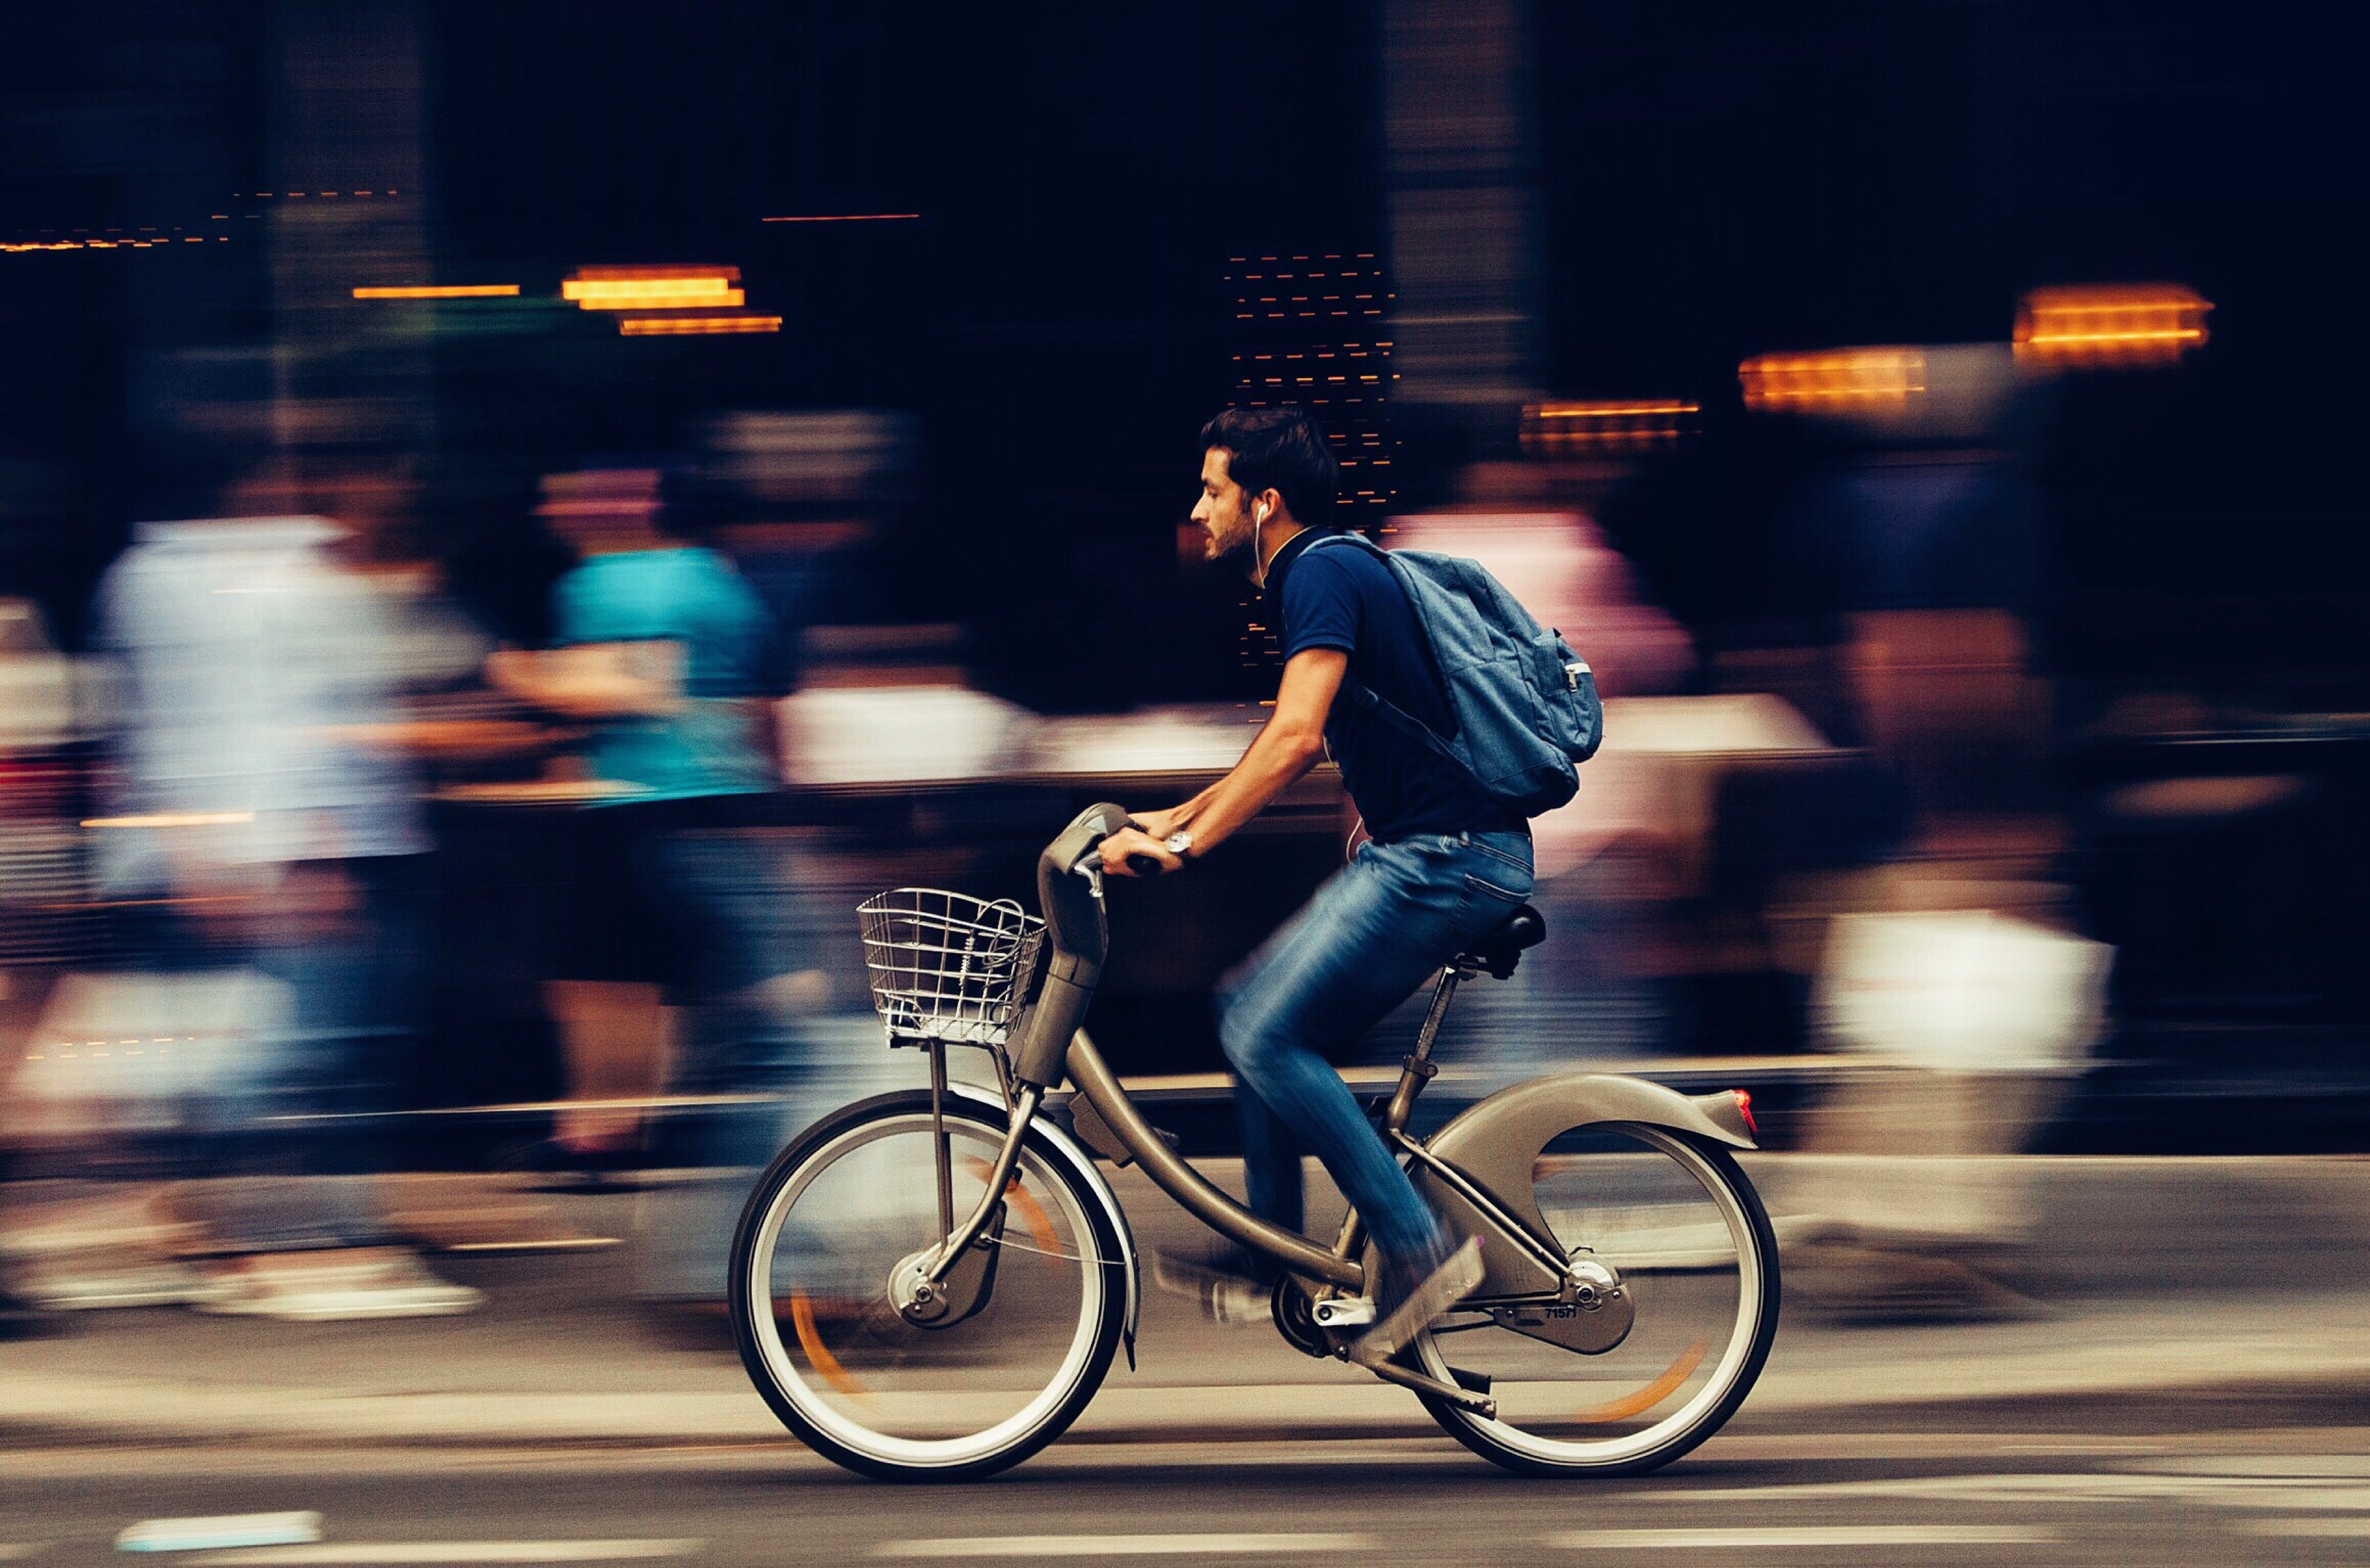 Man Riding Bicycle on City Street, Action, Moving, Travel, Transportation system, HQ Photo